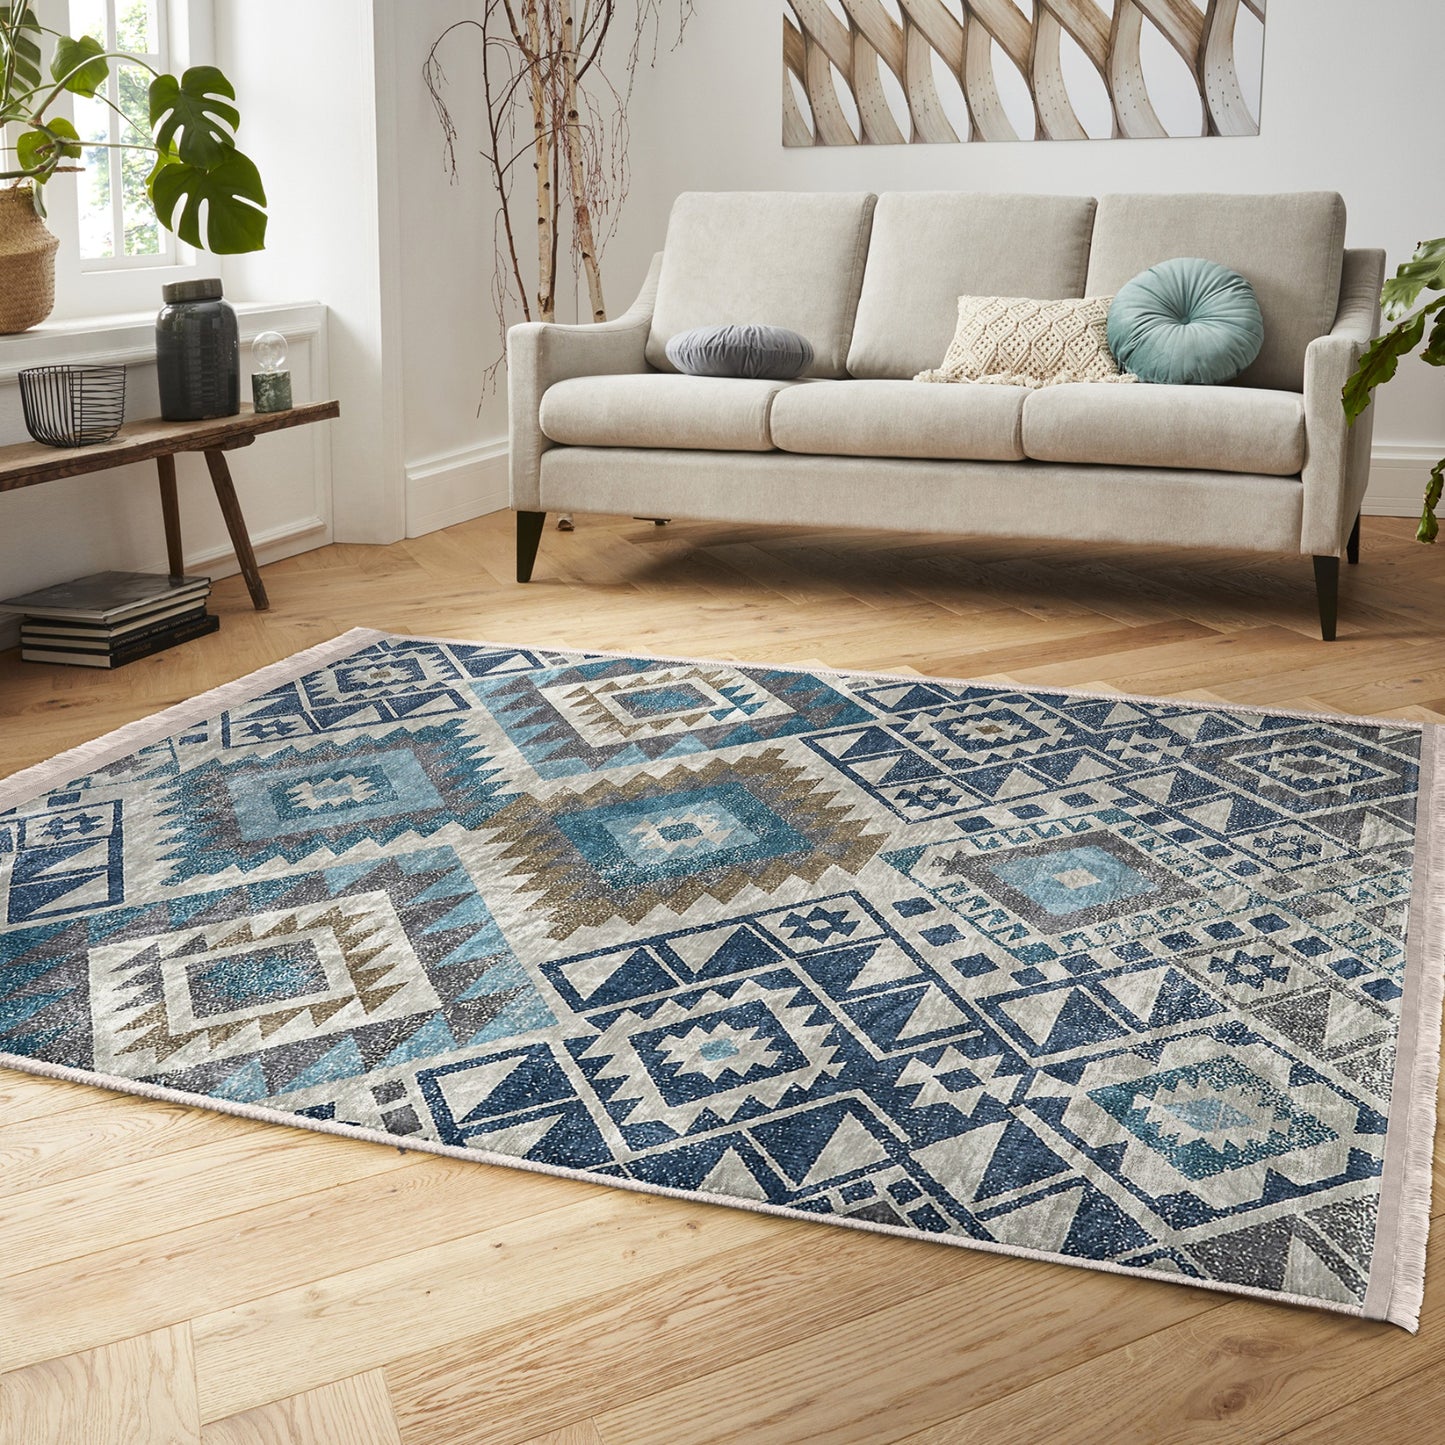 High-Quality Aztec Style Area Rug for Cultural Decor